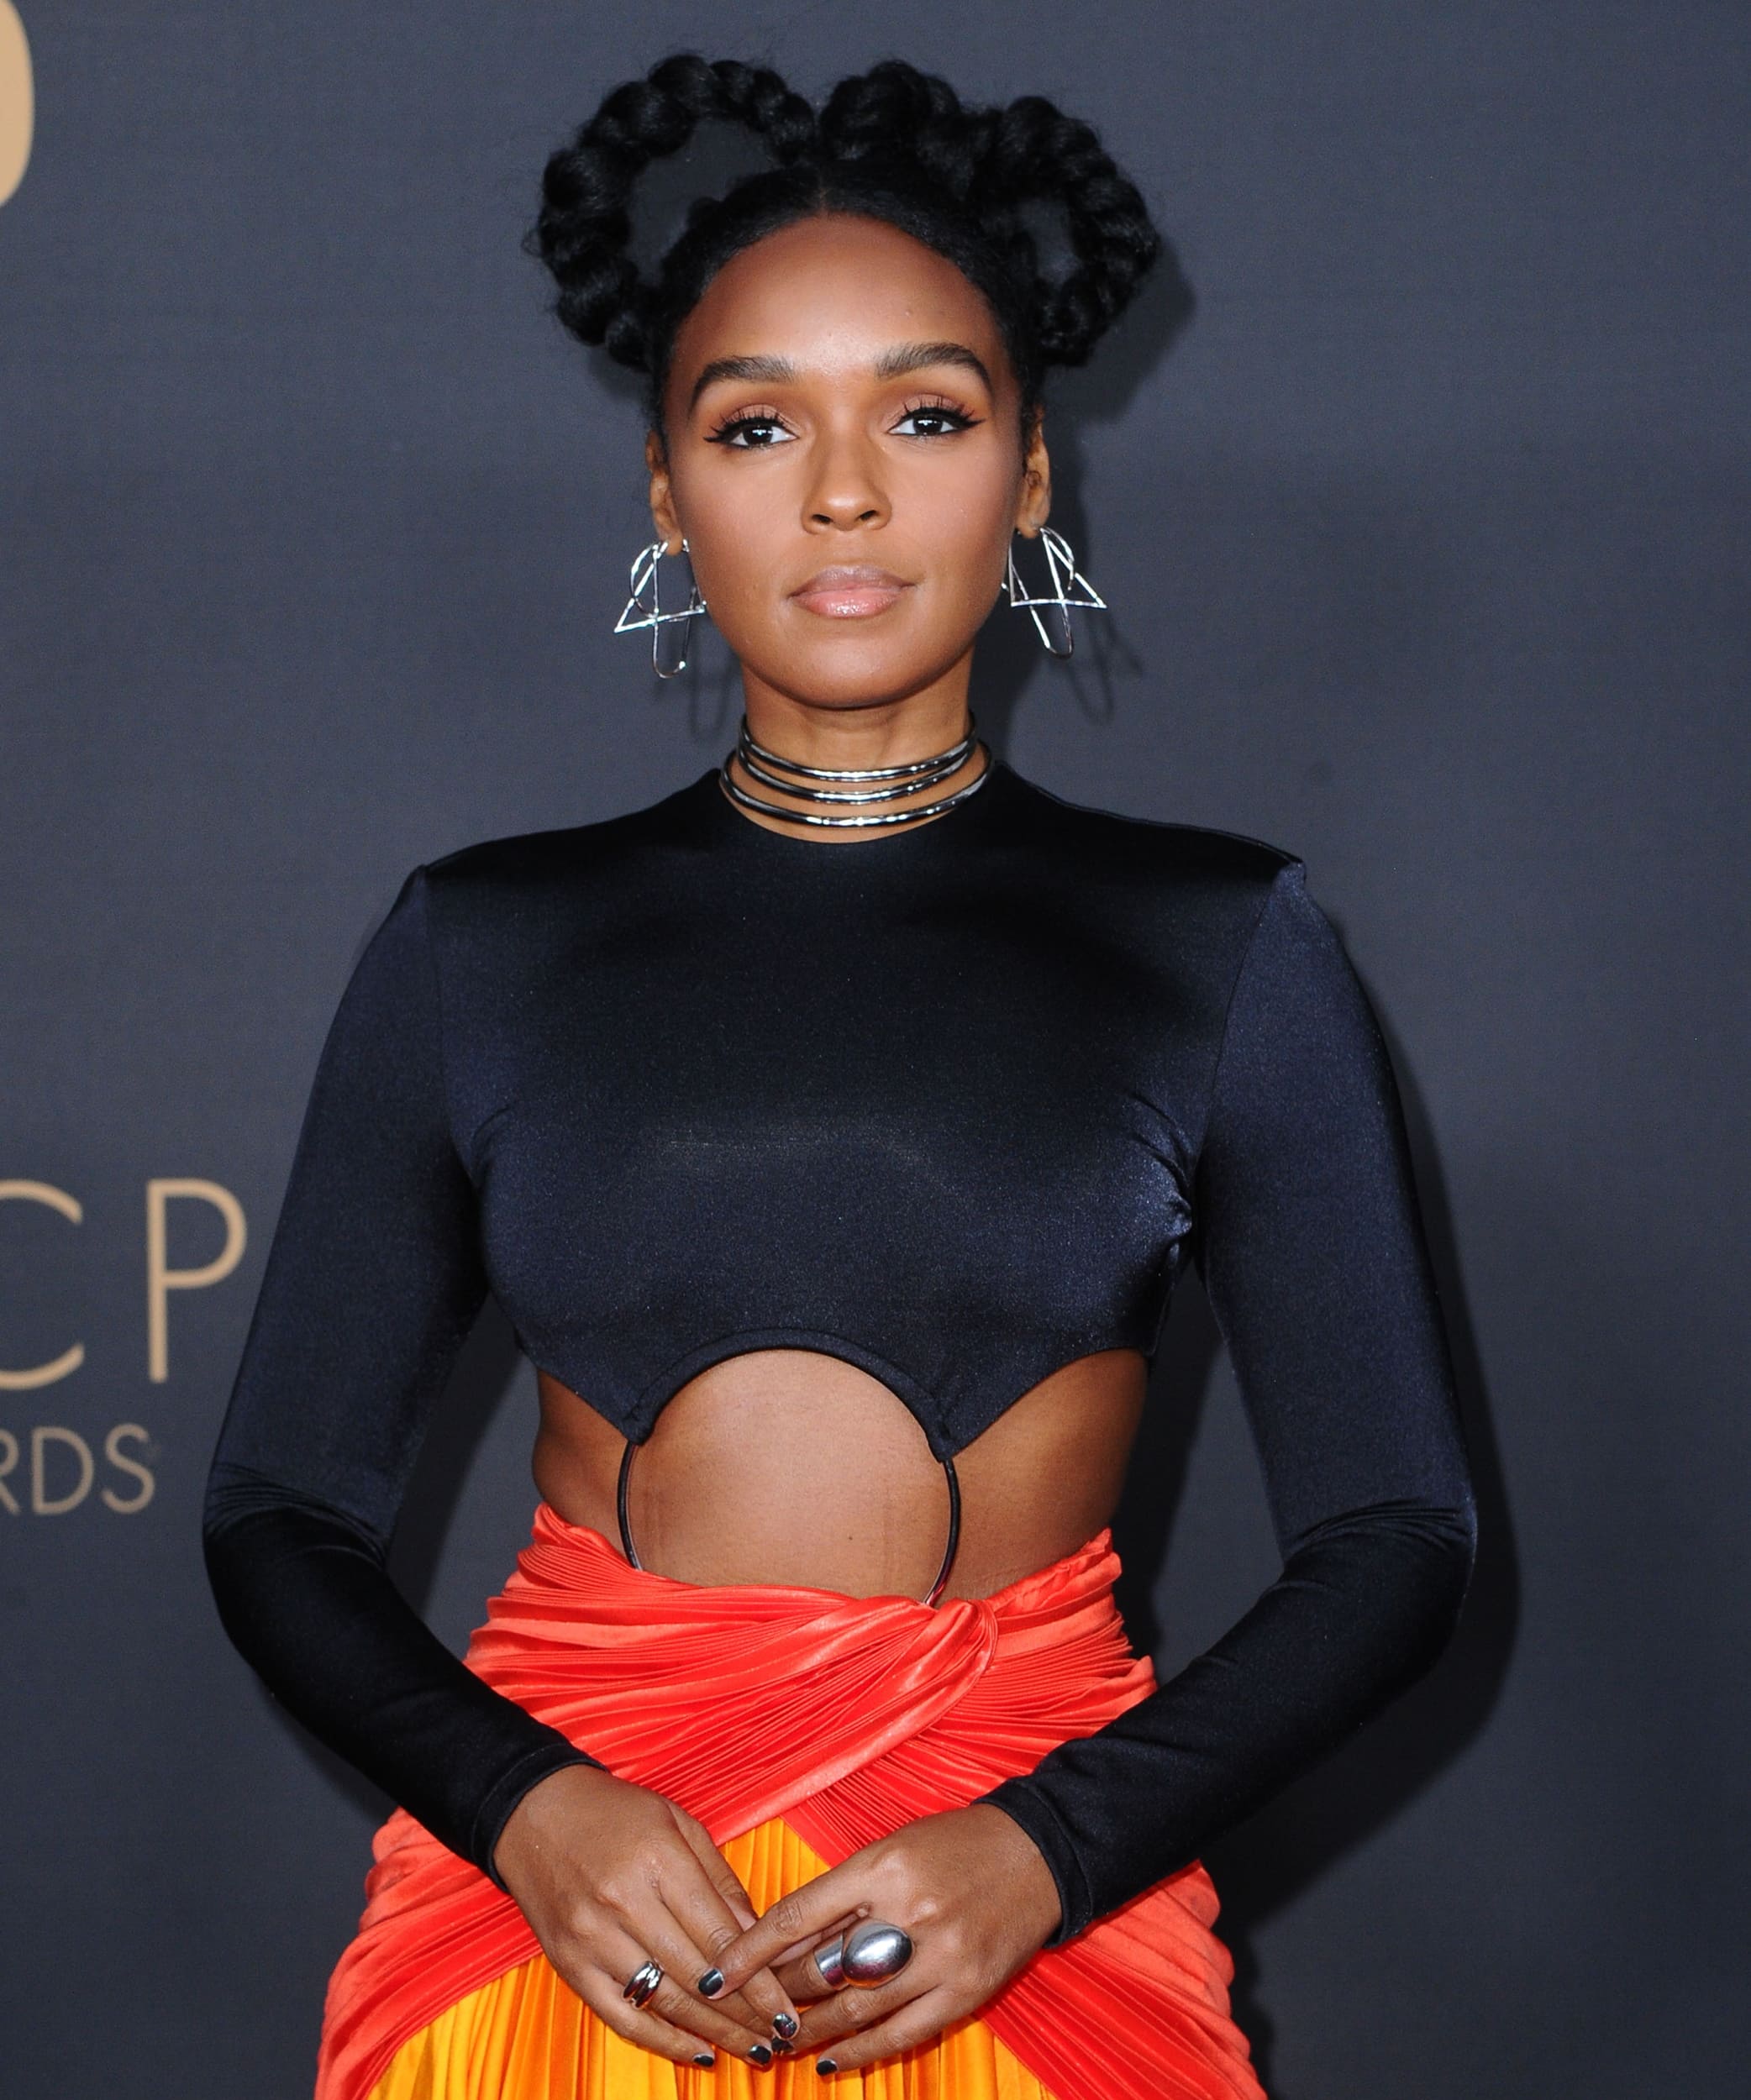 Janelle Monae Robinson is an American singer-songwriter, rapper, actress, and record producer with a net worth of $12 million